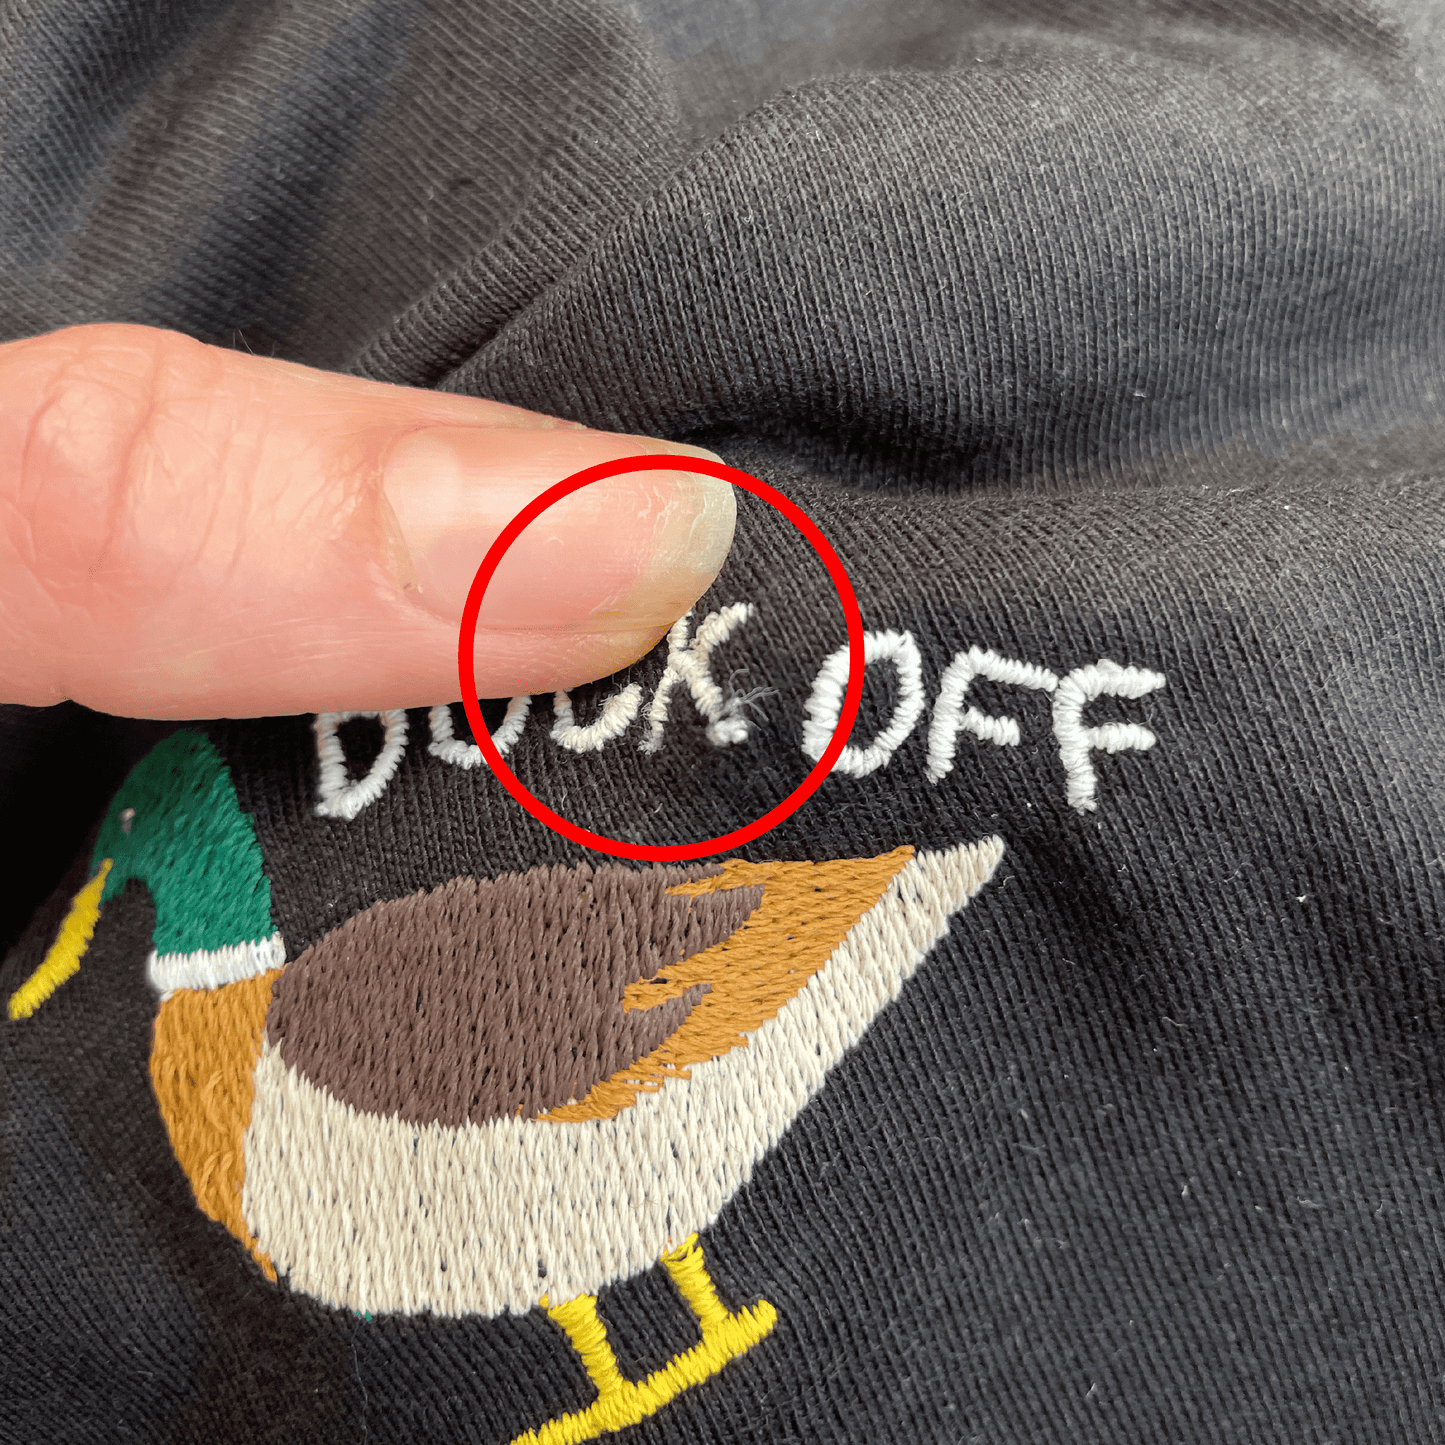 01_ Duck Off Small - DEFECT - Small hole